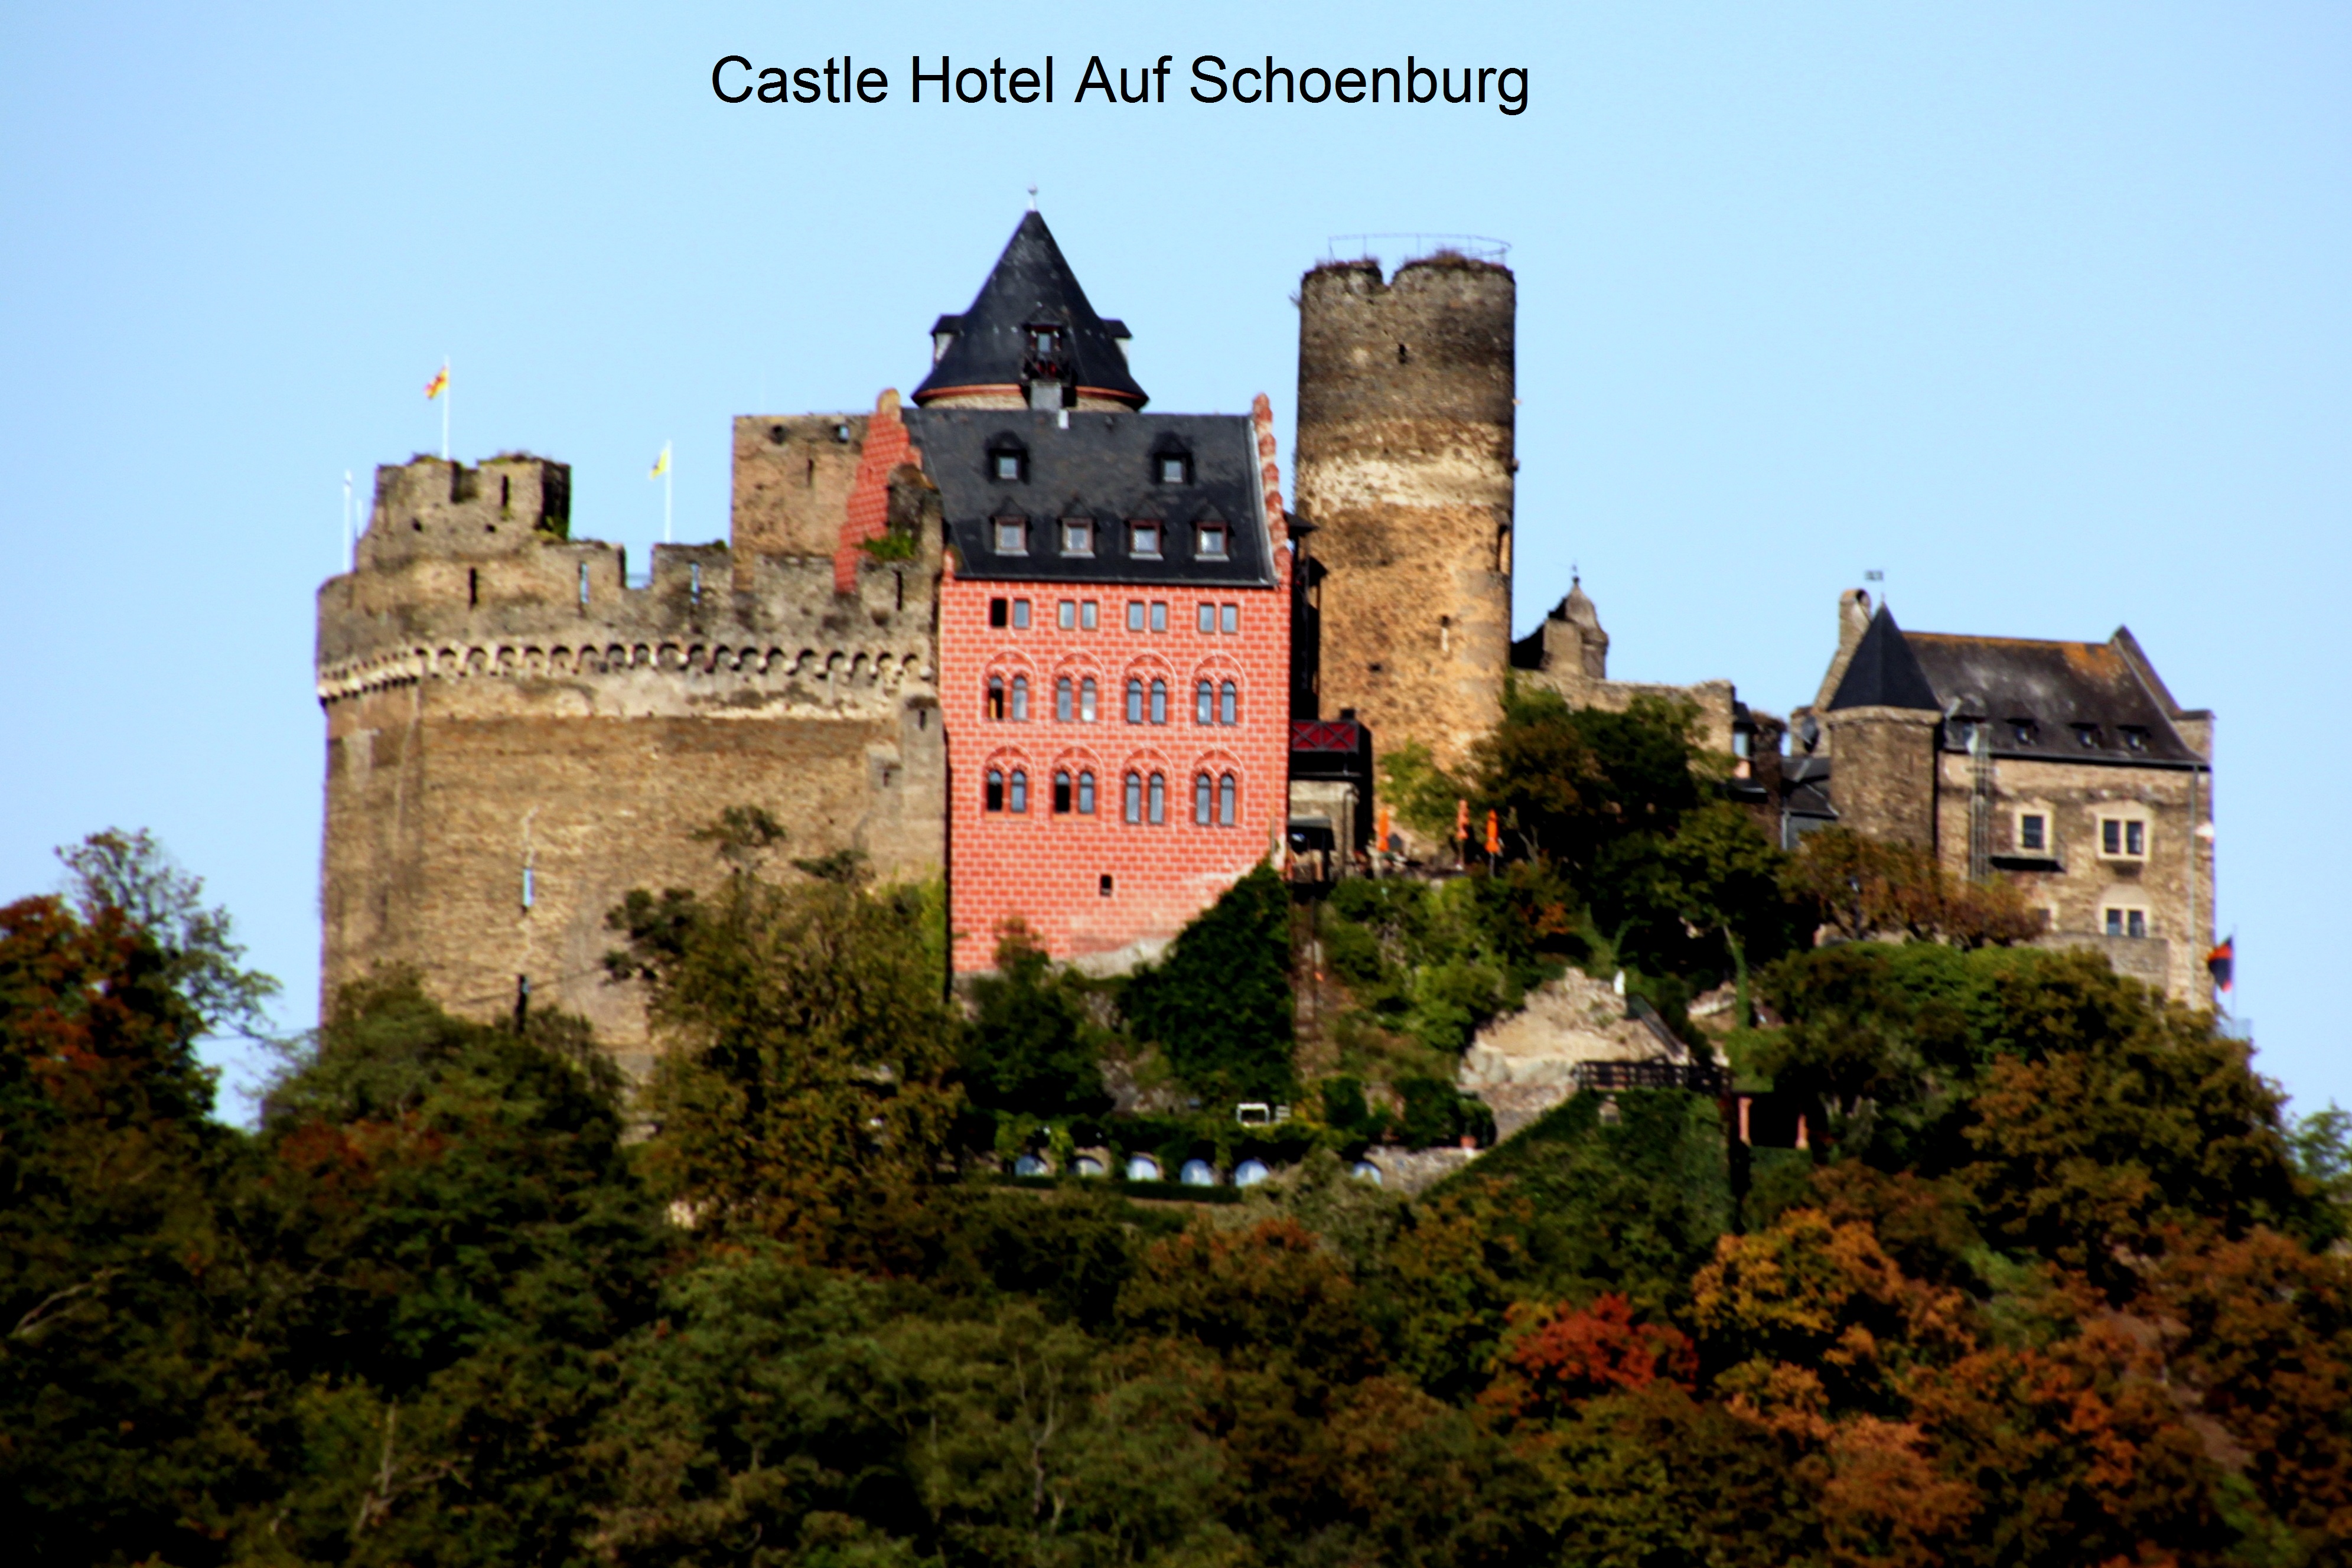 Castles along the Rhine River Gorge Click here for more pictures.